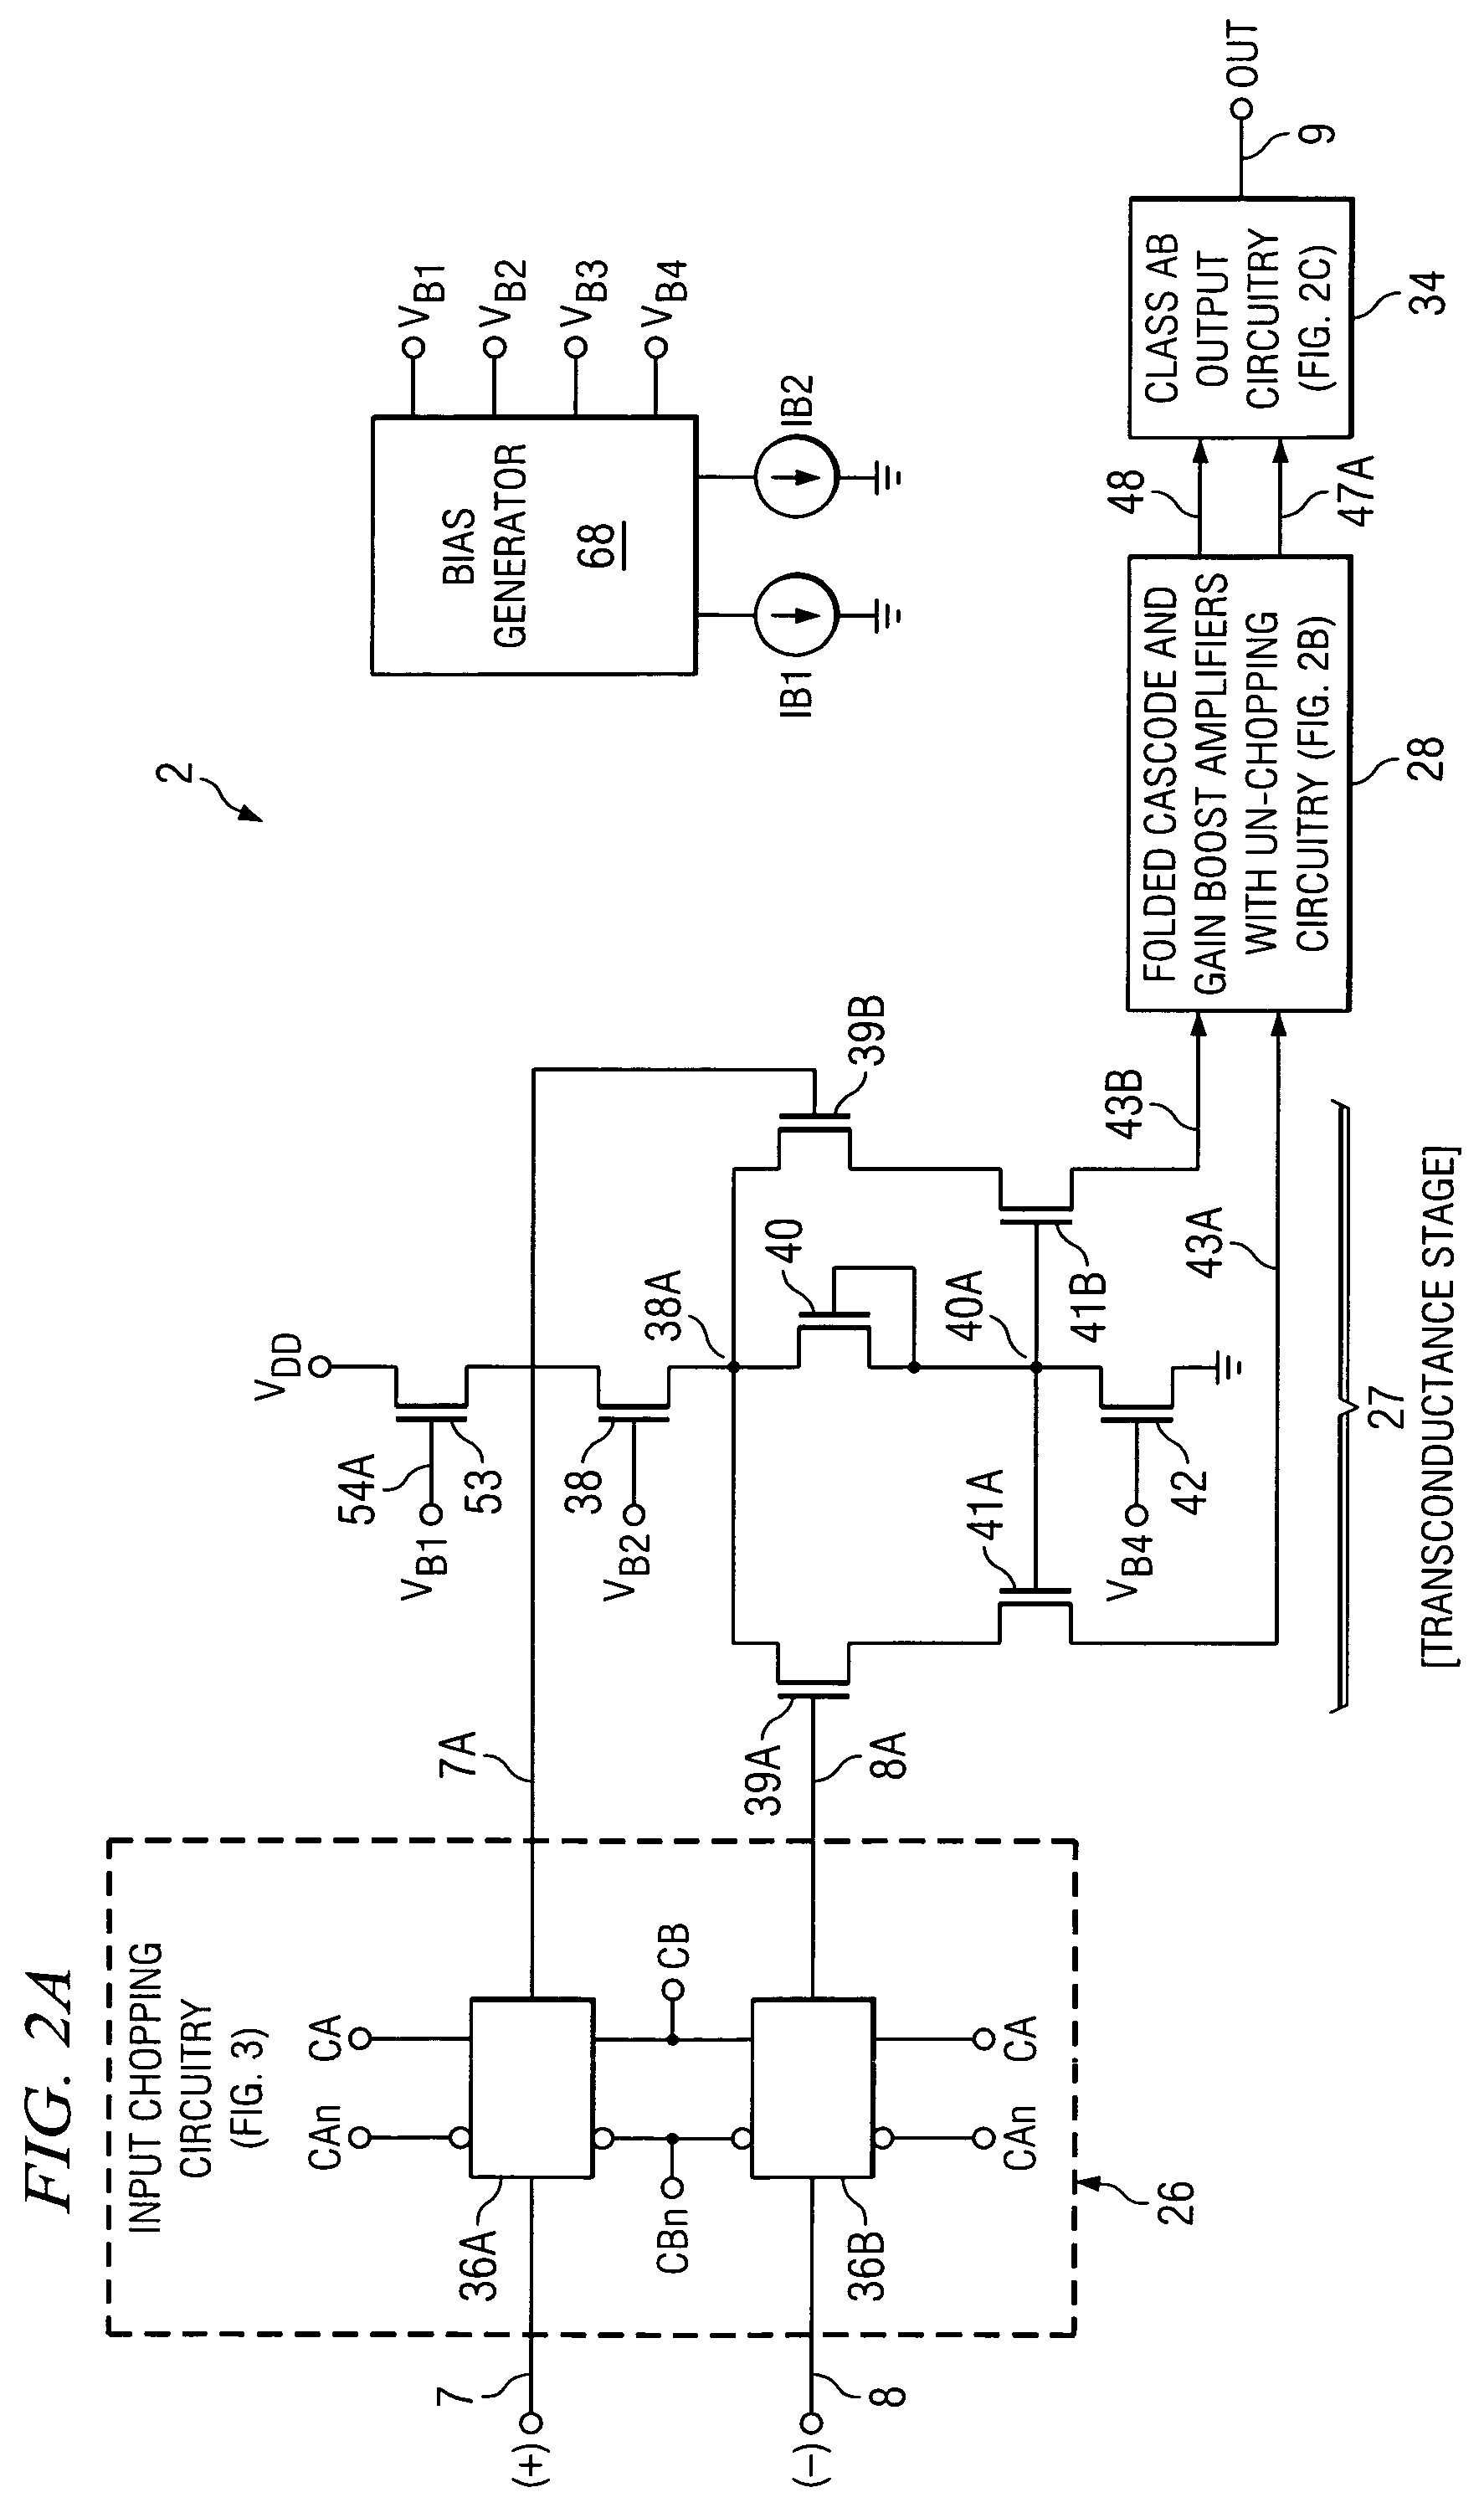 Chopper-stabilized operational amplifier and method